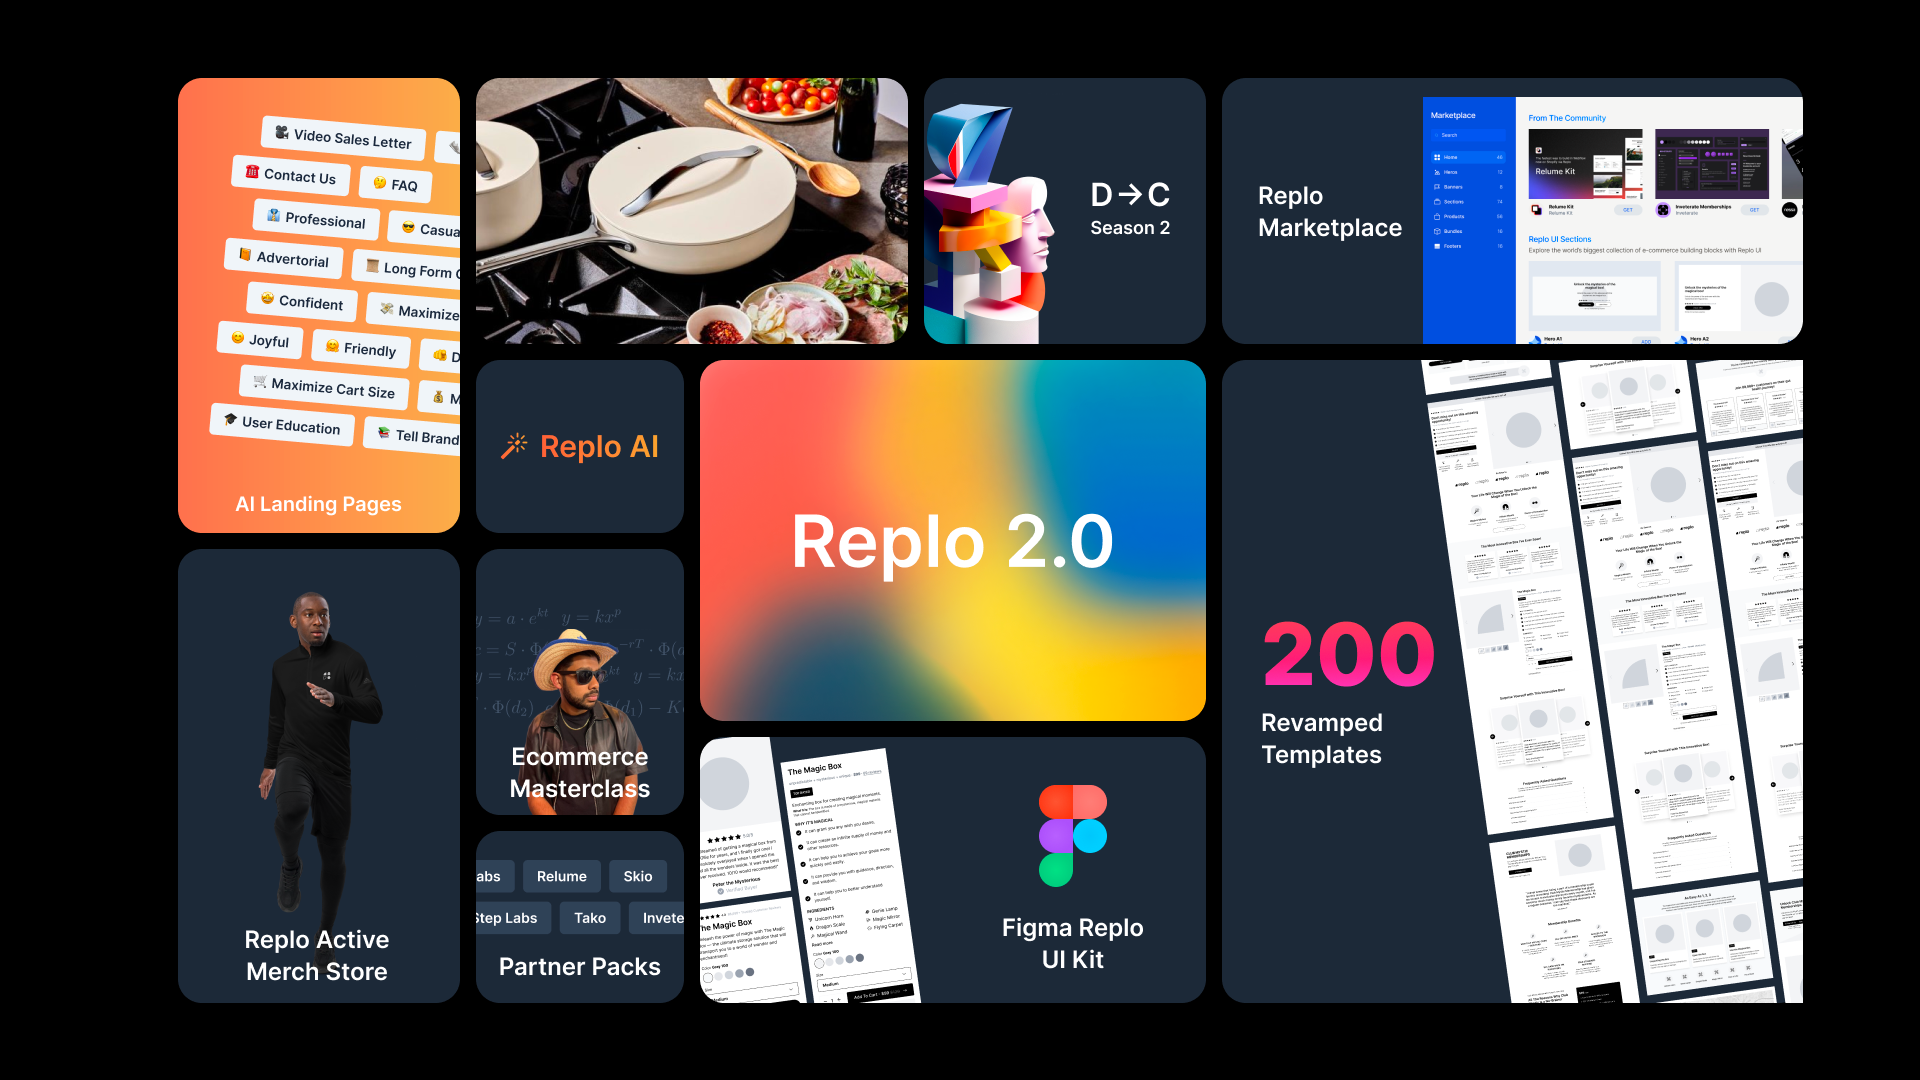 Introducing Replo 2.0 — Building Together!